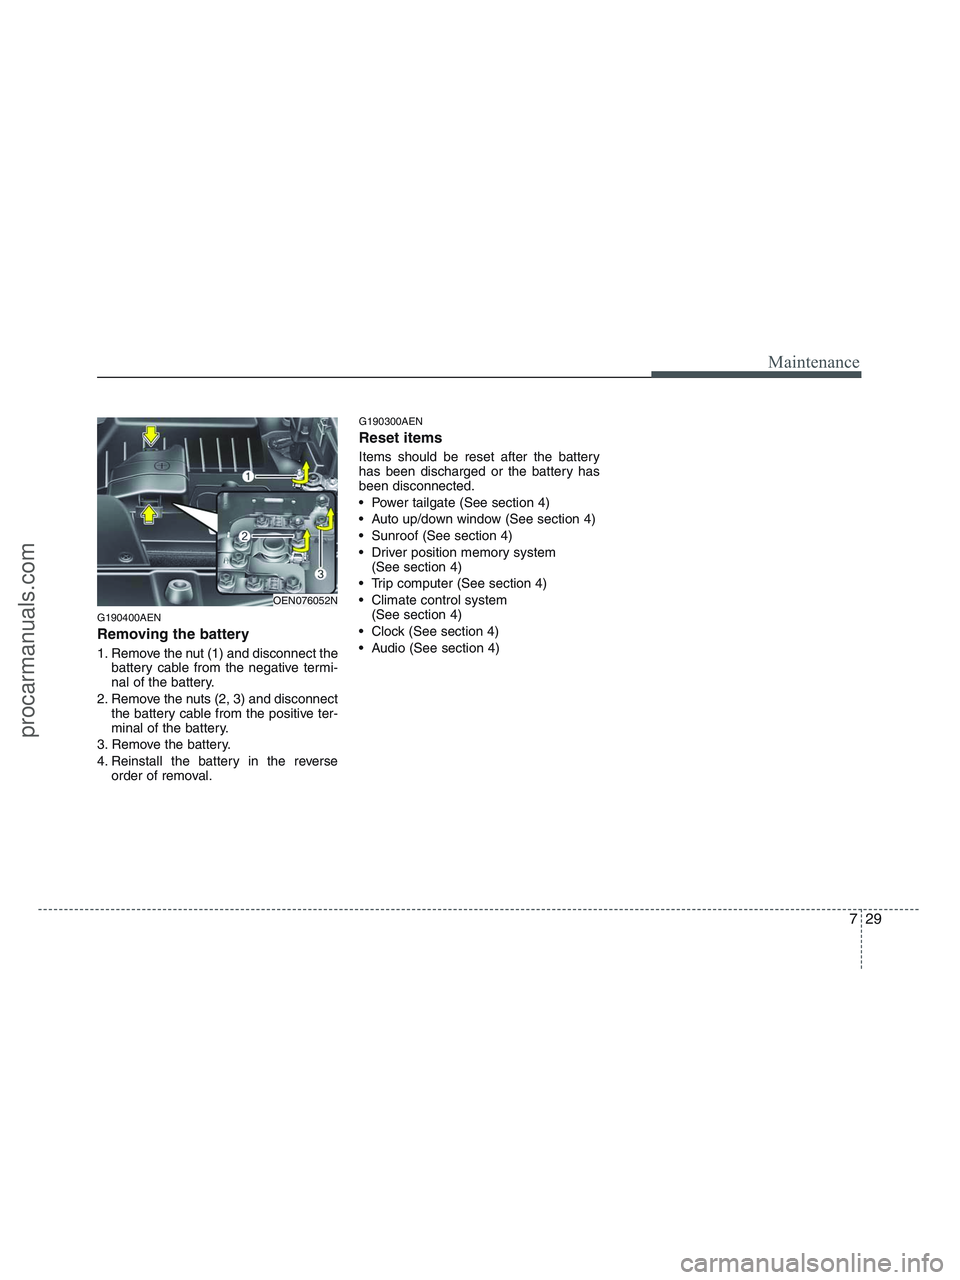 HYUNDAI VERACRUZ 2010  Owners Manual 729
Maintenance
G190400AEN
Removing the battery
1. Remove the nut (1) and disconnect the
battery cable from the negative termi-
nal of the battery.
2. Remove the nuts (2, 3) and disconnect
the battery